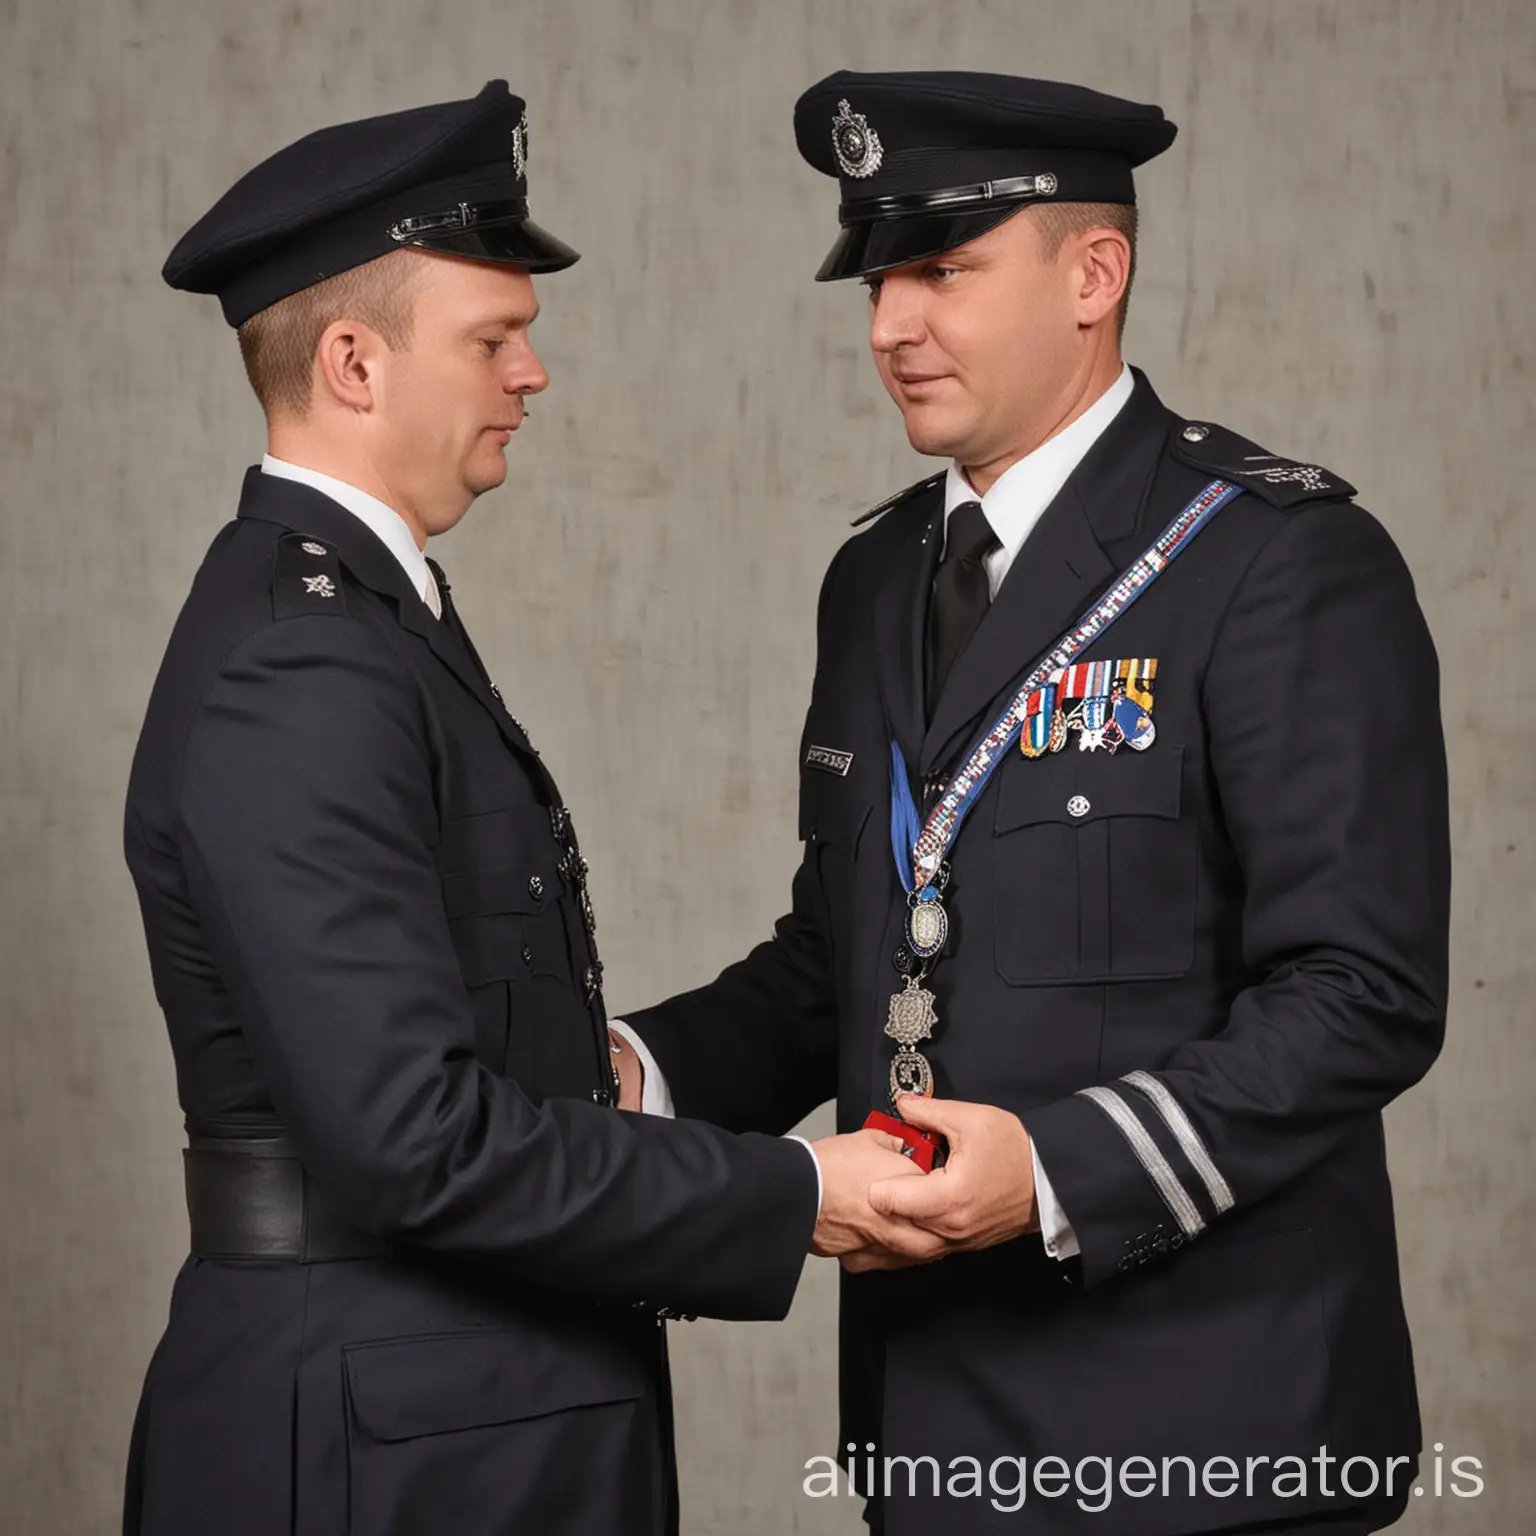 a police officer in his ranking ceremony receiving medal